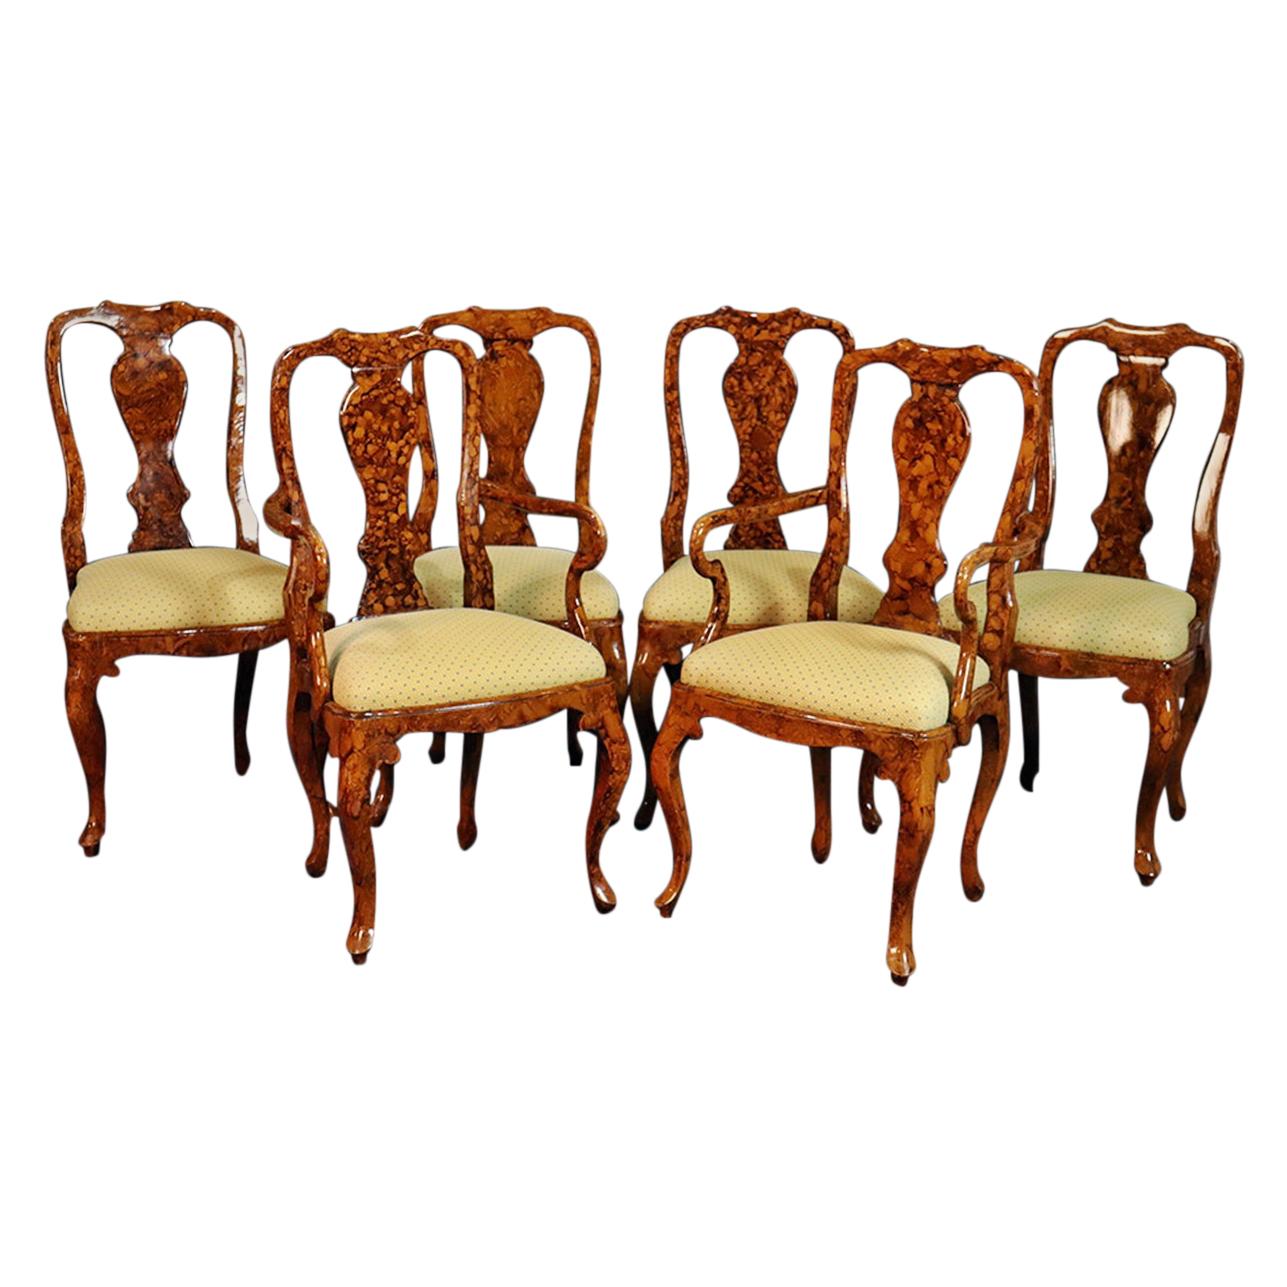 Set of 6 English Faux Tortoise Shell Decorated Georgian Style Dining Chairs